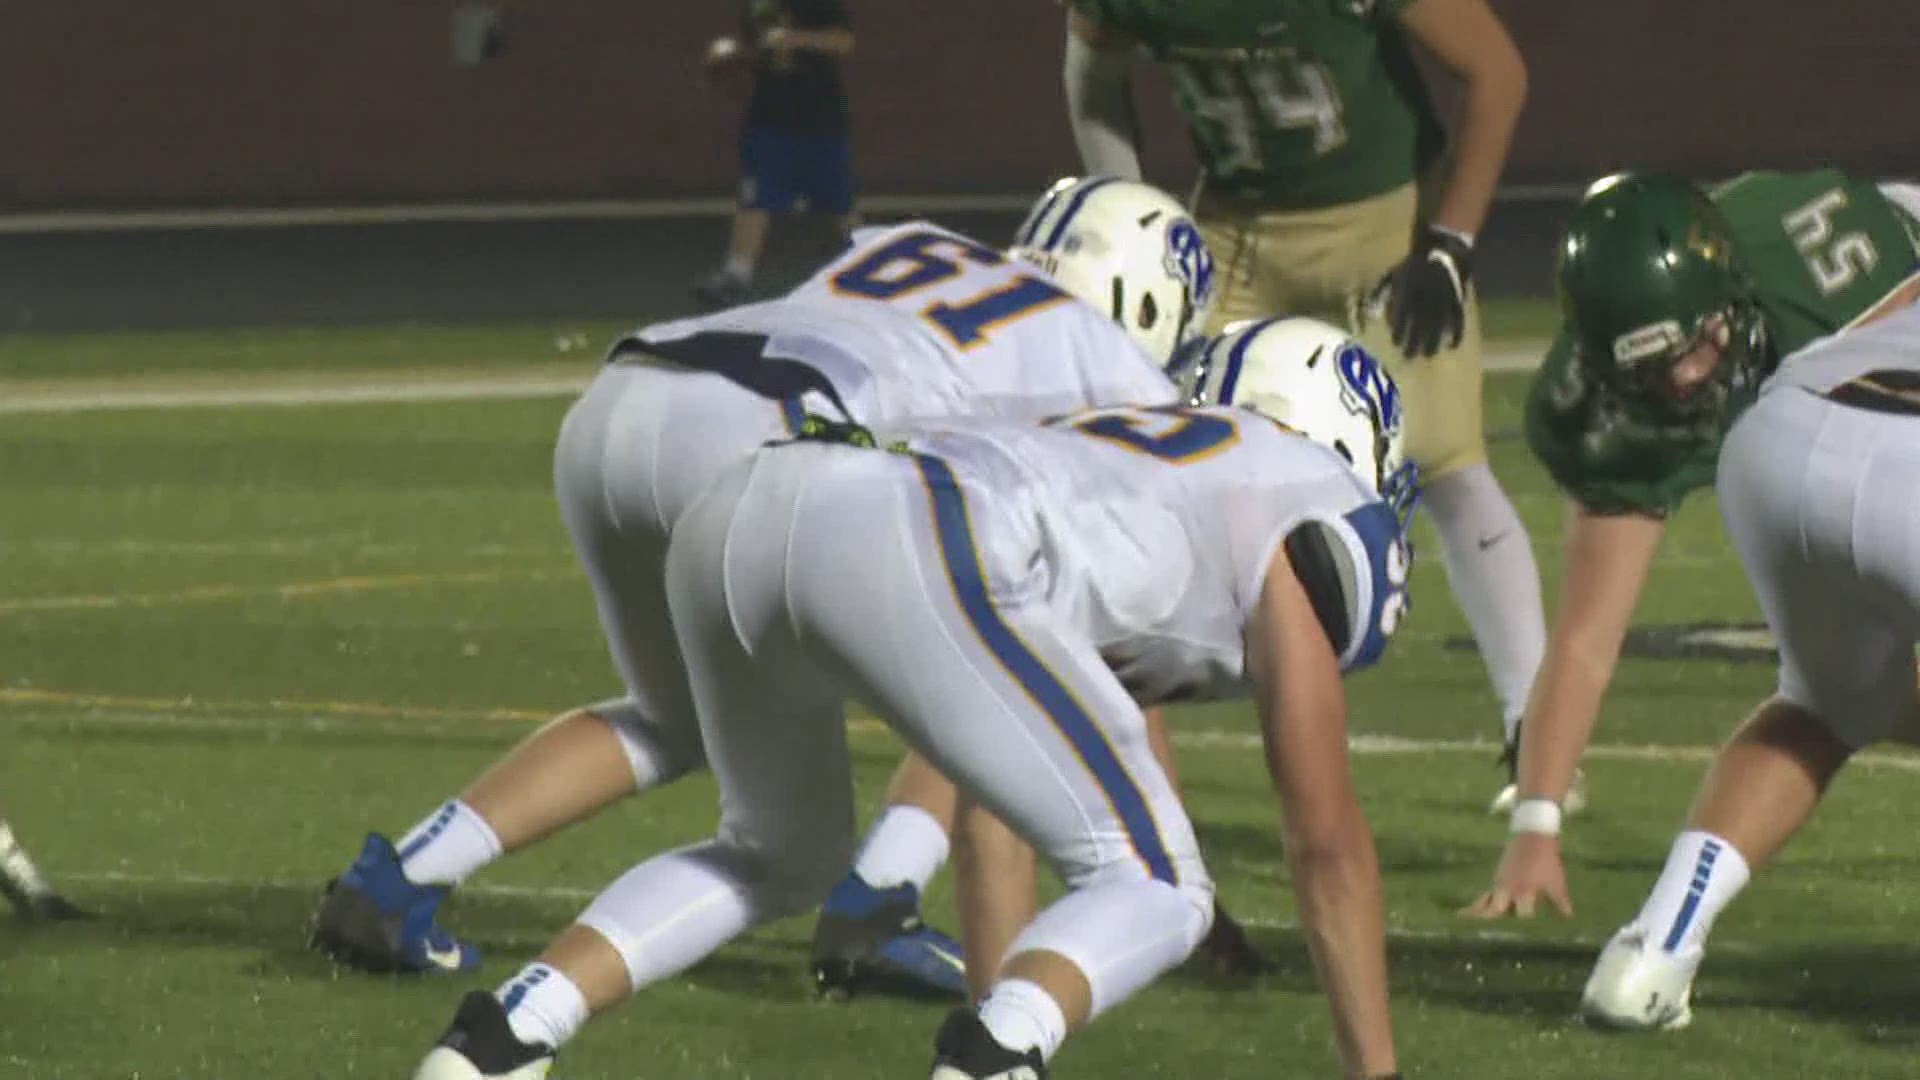 Highlights from NorthPointe Christian vs. Comstock Park